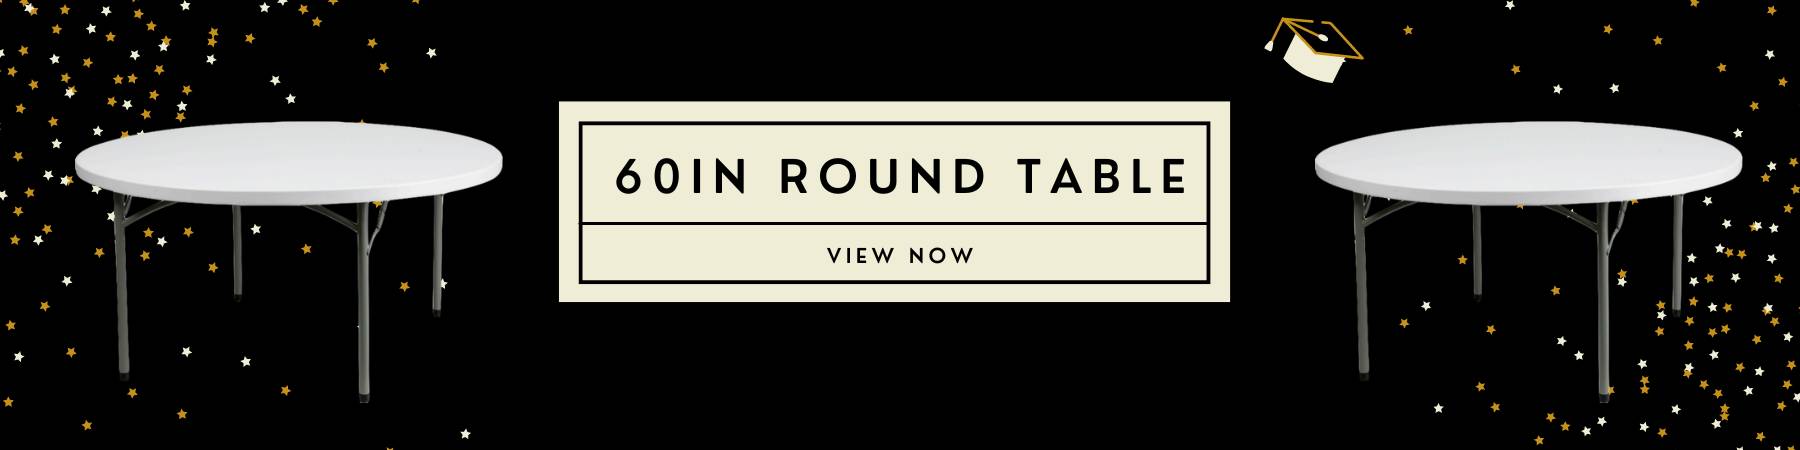 60in Round Table